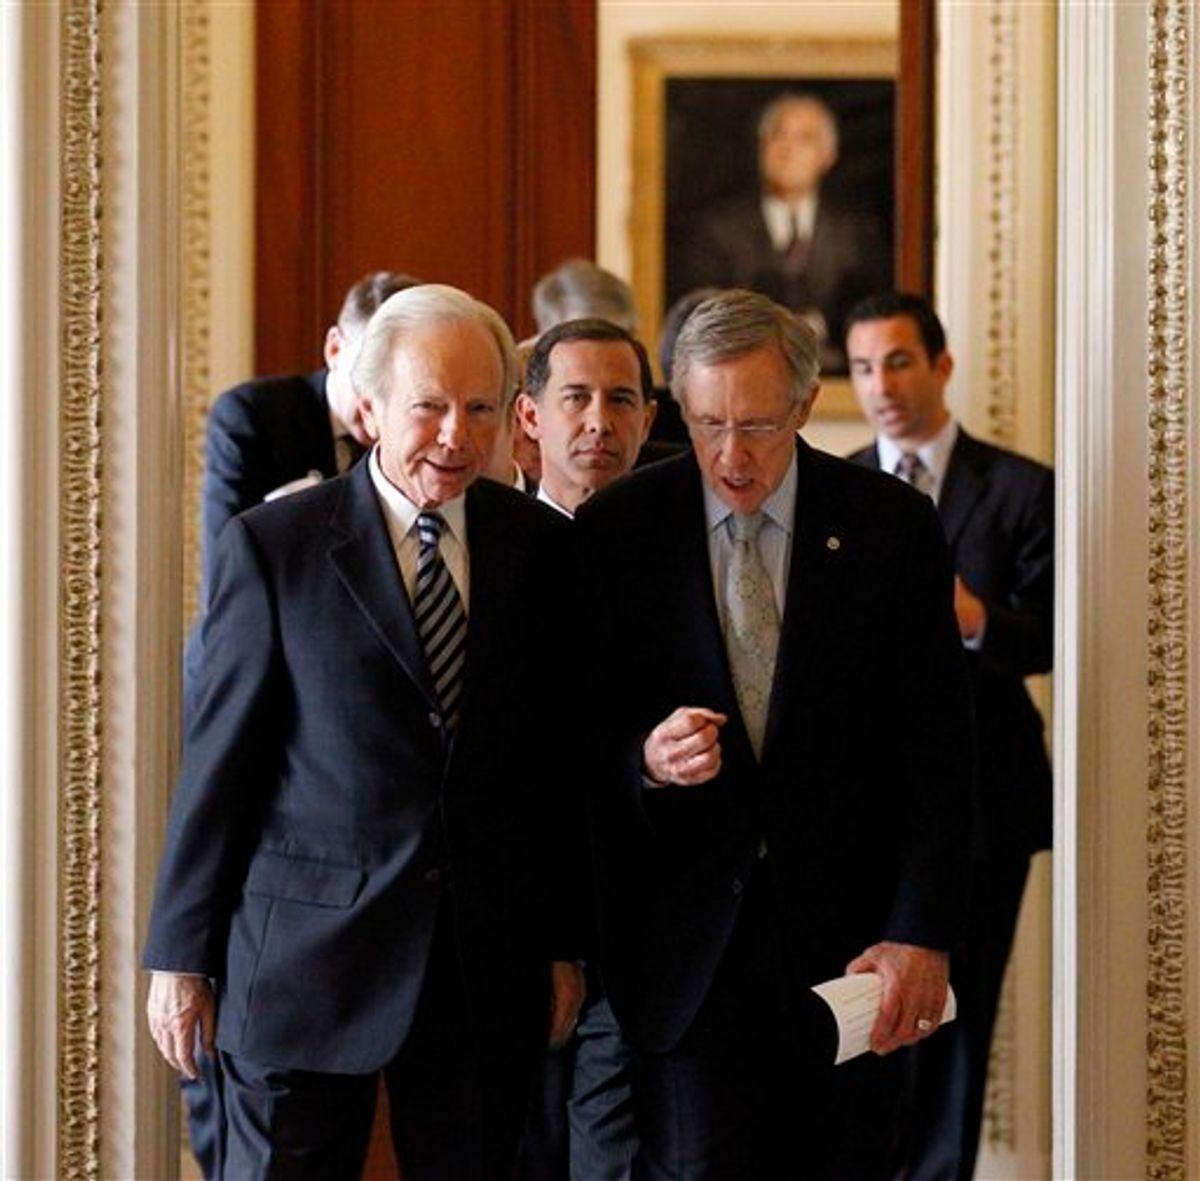 Sen. Joe Lieberman, I-Conn., left, and Senate Majority Leader Sen. Harry Reid, D-Nev., right, with Joe Solmonese, president of the Human Rights Campaign, center, head to a news conference about the "Don't Ask Don't Tell" bill on an unusual Saturday session on Capitol Hill in Washington Saturday, Dec. 18, 2010.  Repeal would mean that, for the first time in American history, gays would be openly accepted by the military. Reid said a final vote would come at 3 p.m. (AP Photo/Alex Brandon) (AP)